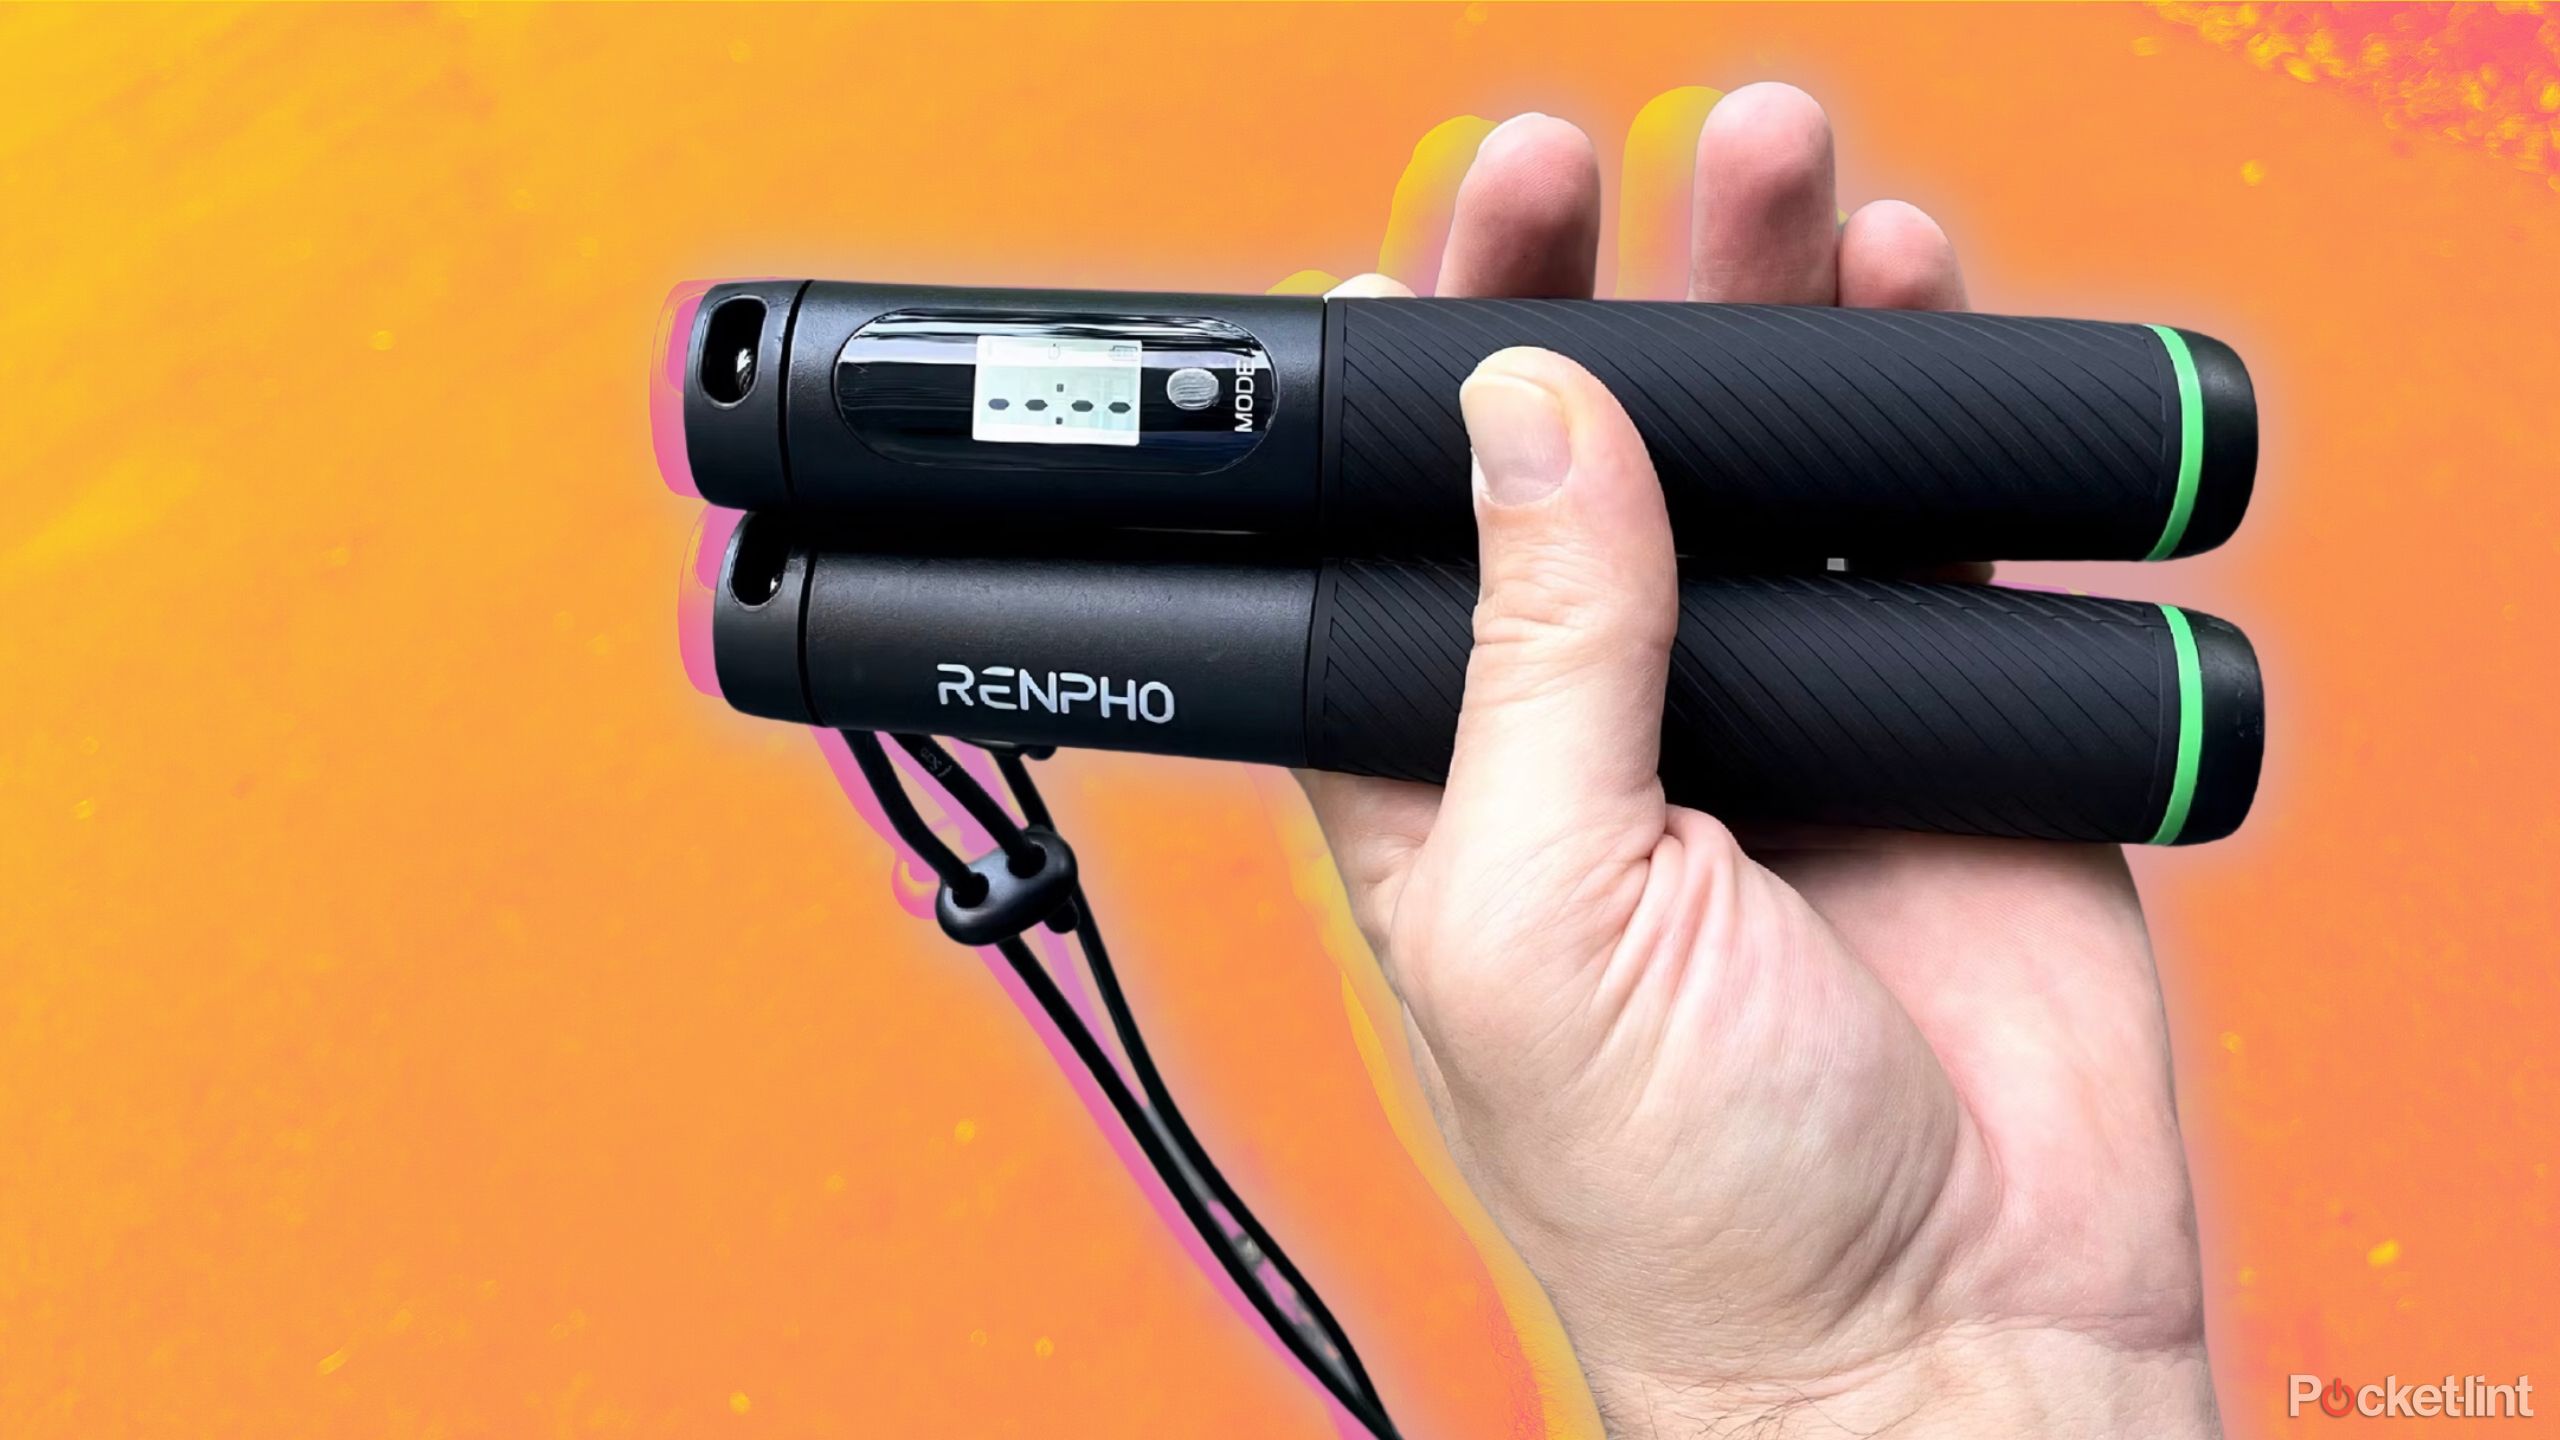 Renpho Smart Jump Rope review: 3 workouts in 1